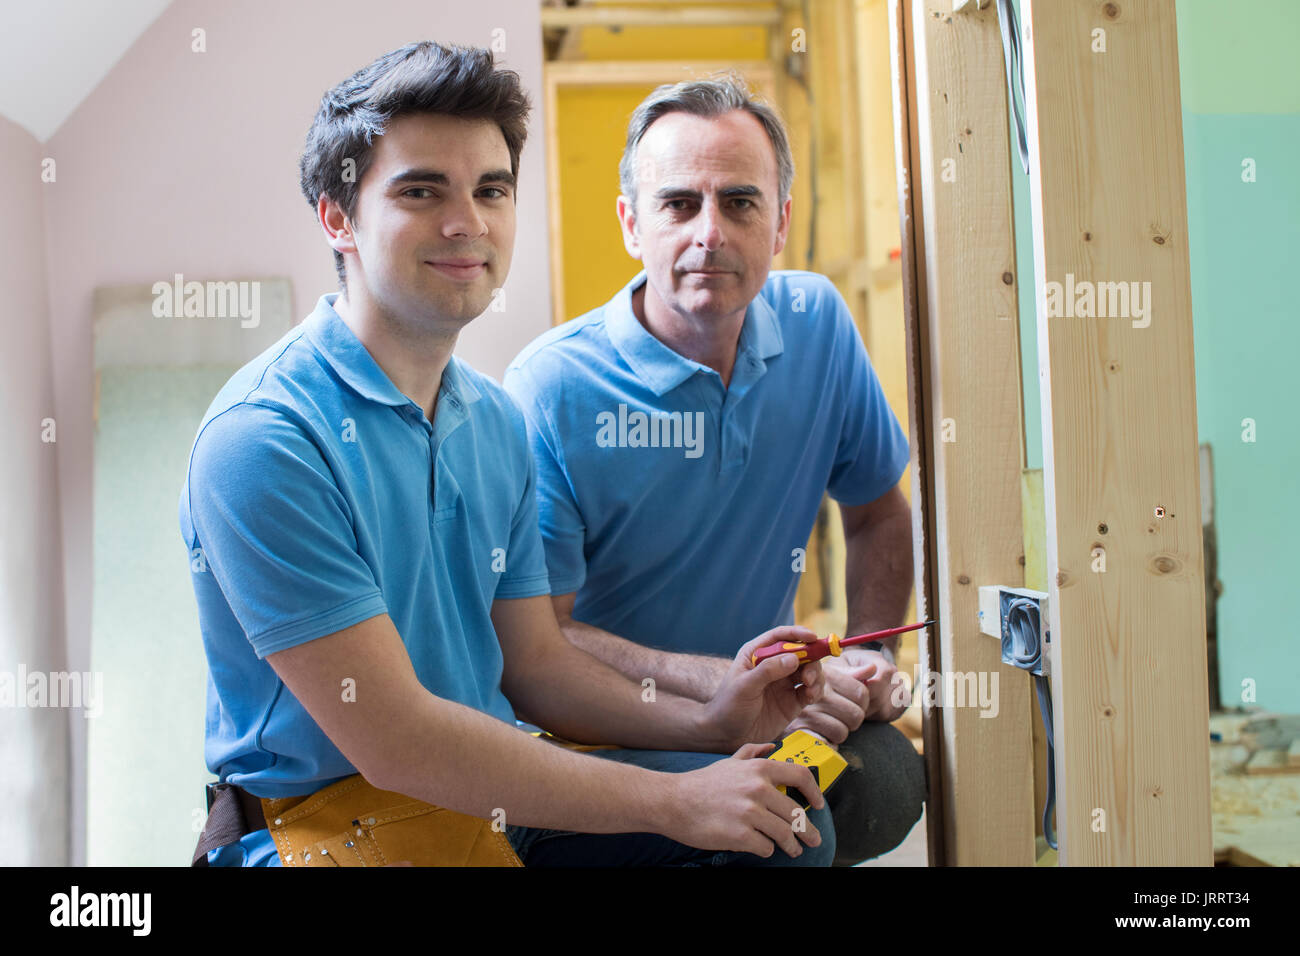 Portrait Of Electrician With Apprentice Working In New Home Stock Photo